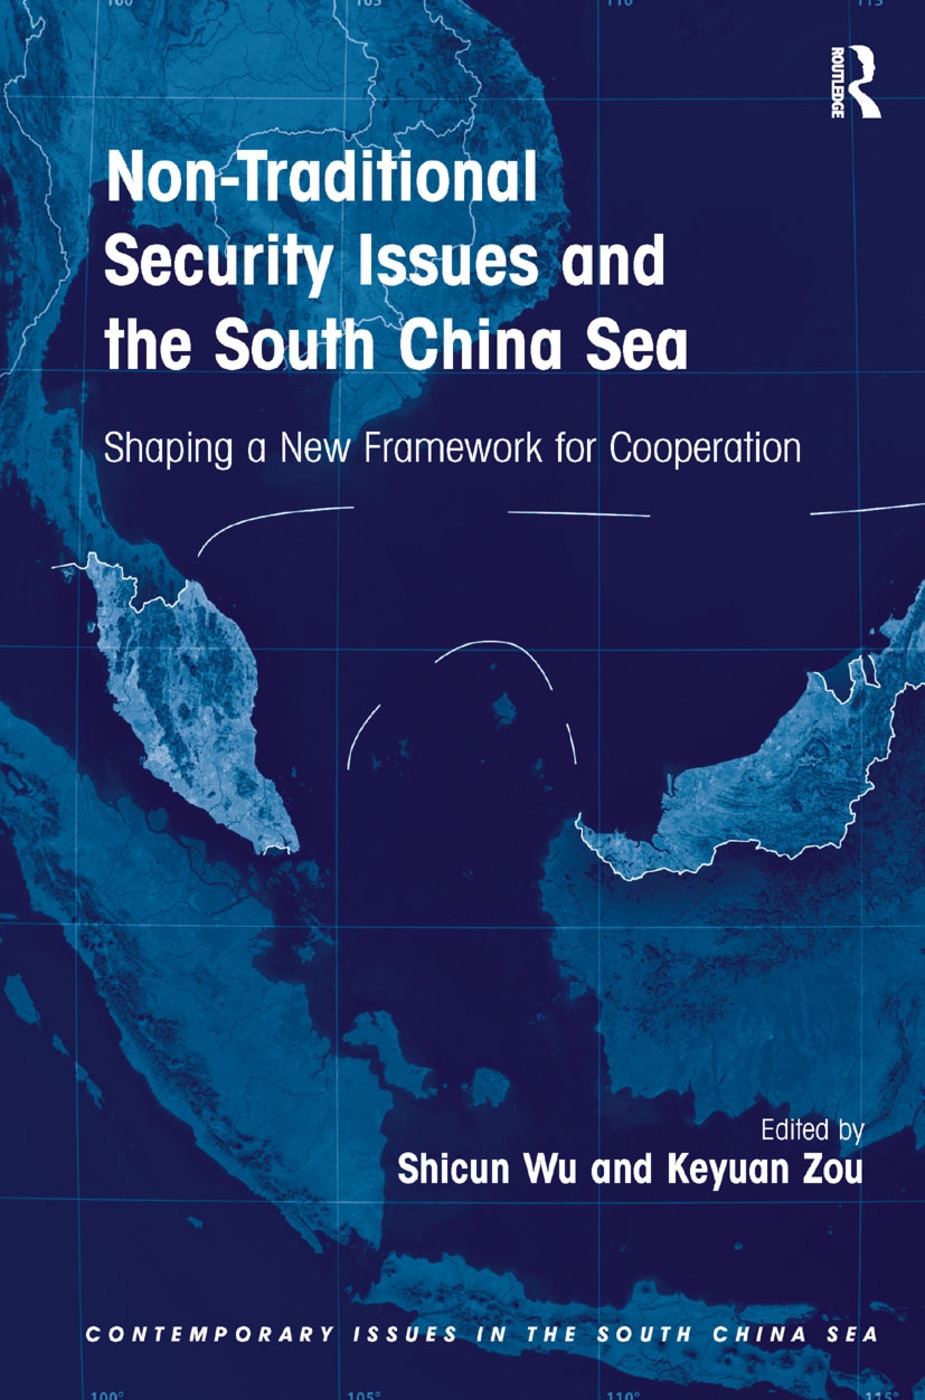 Non-Traditional Security Issues and the South China Sea: Shaping a New Framework for Cooperation. Edited by Shicun Wu, Keyuan Zou